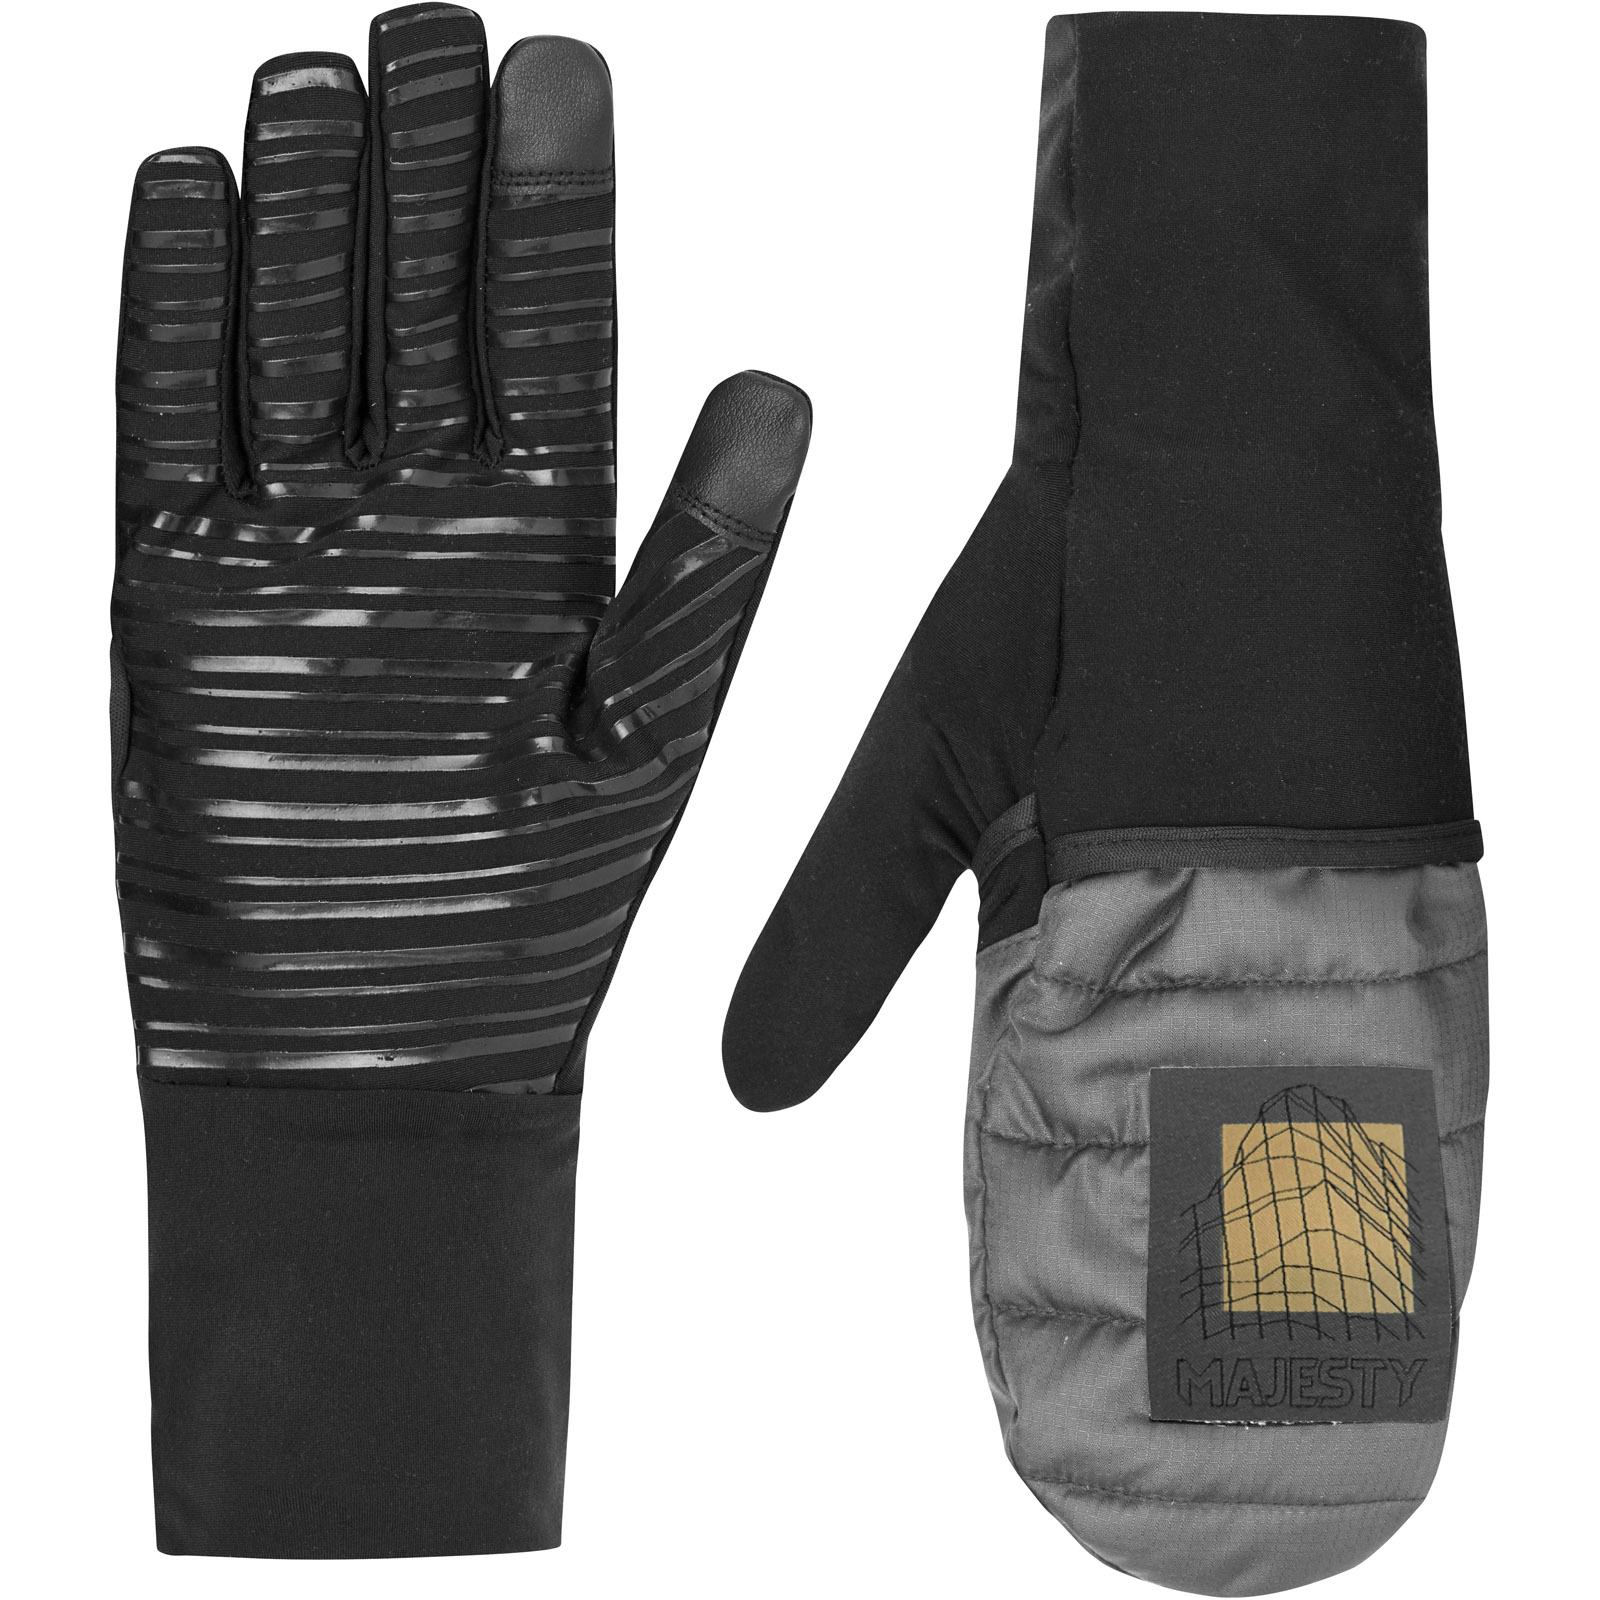 Heatshield Insulated Gloves - MAJESTY SKIS - Skis Online - Official MAJESTY  Store